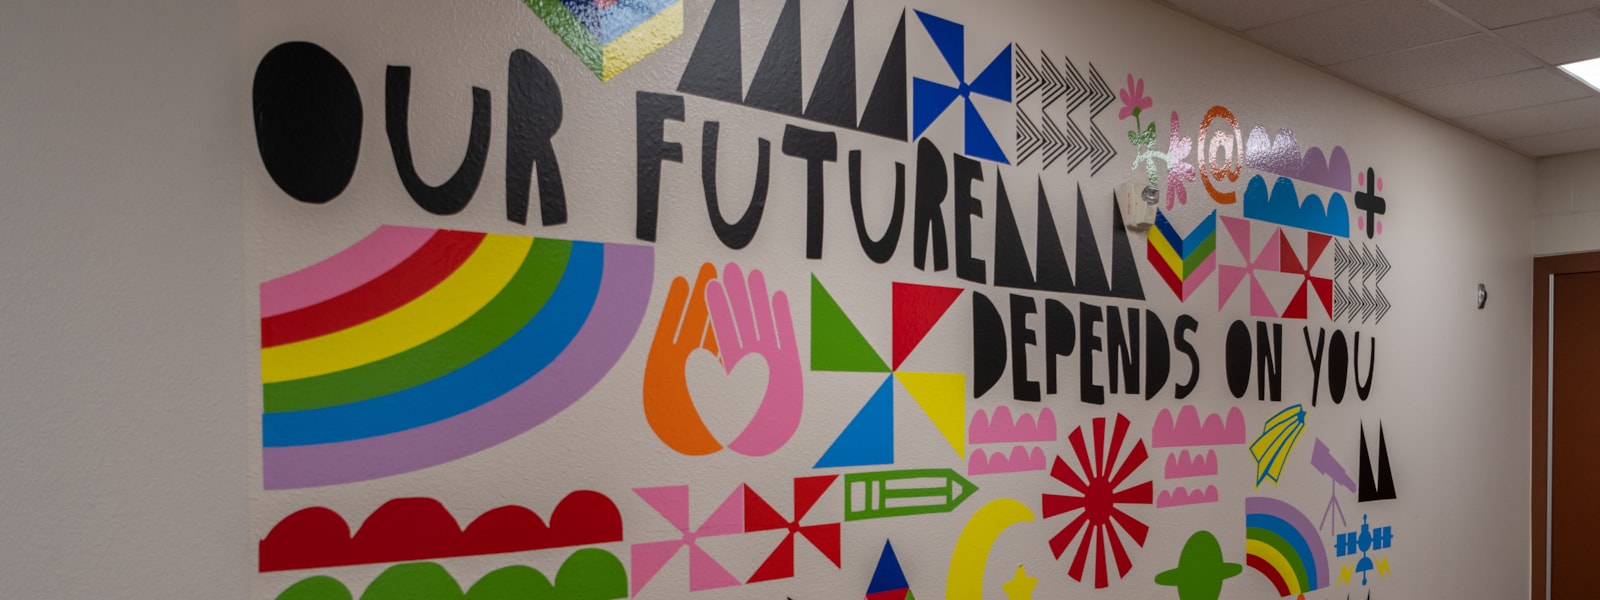 Our Future Depends On You Mural with colorful shapes